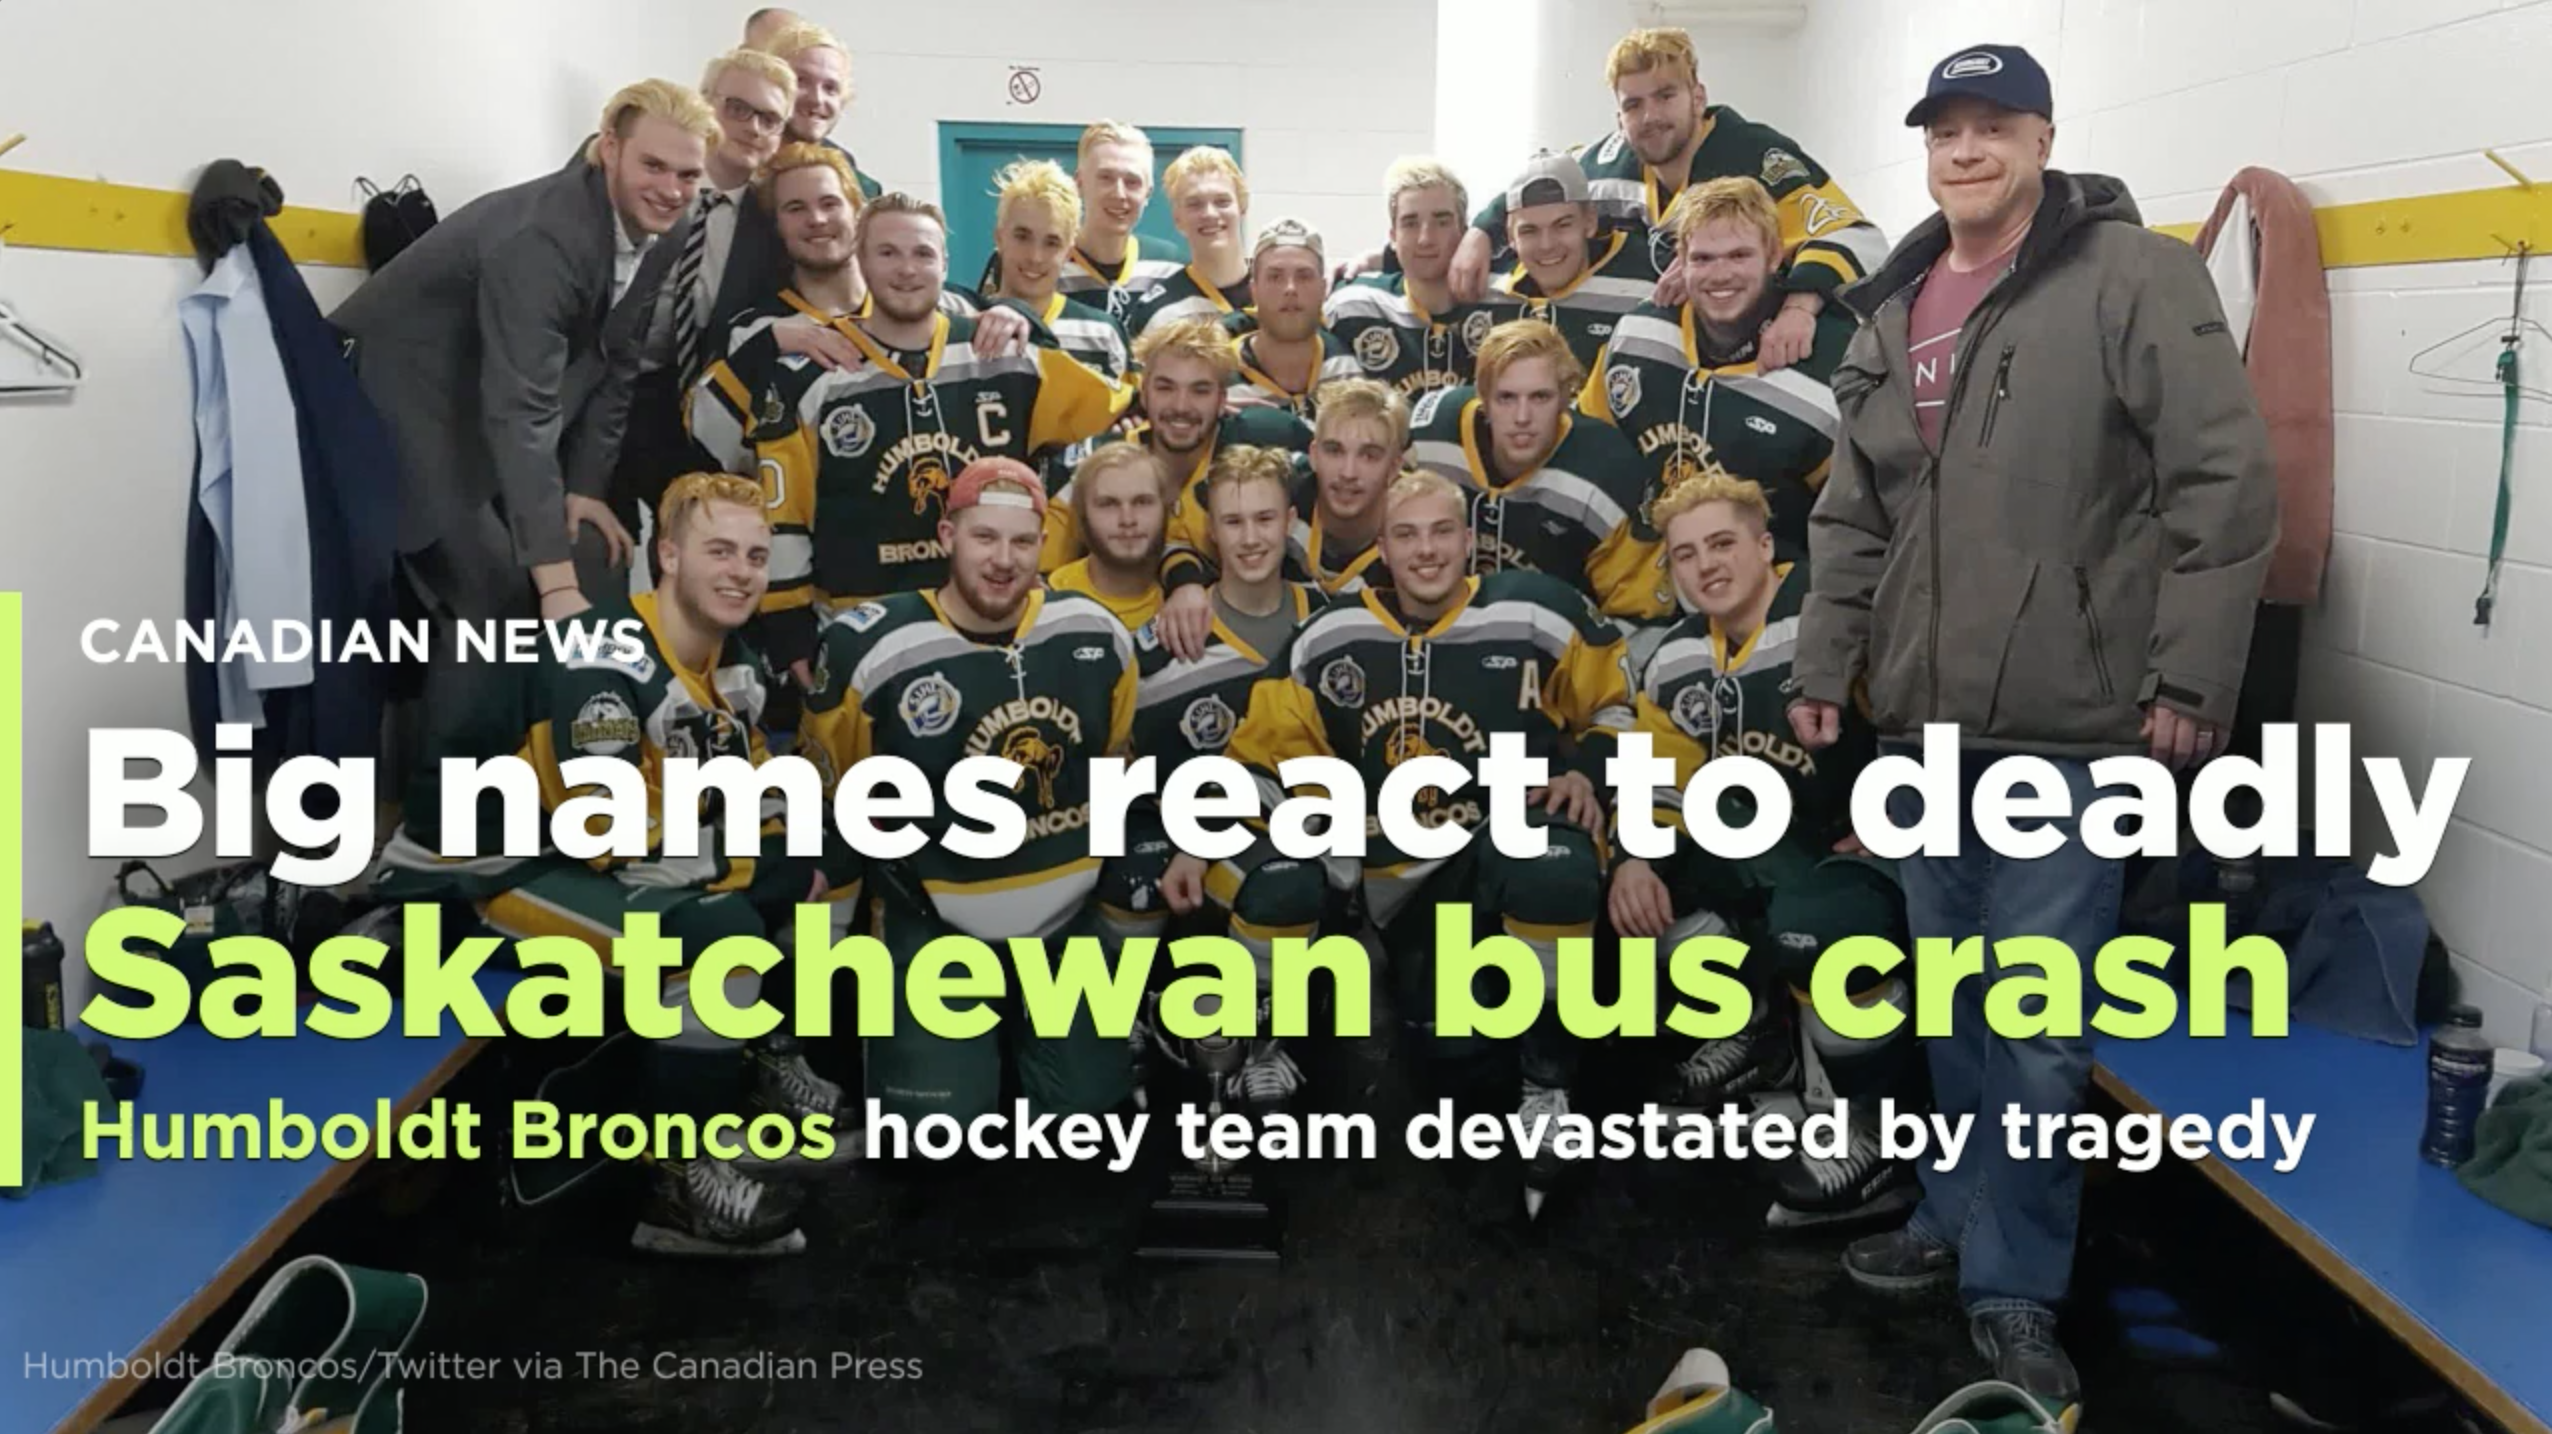 The Humboldt Broncos played their first game since its tragic bus